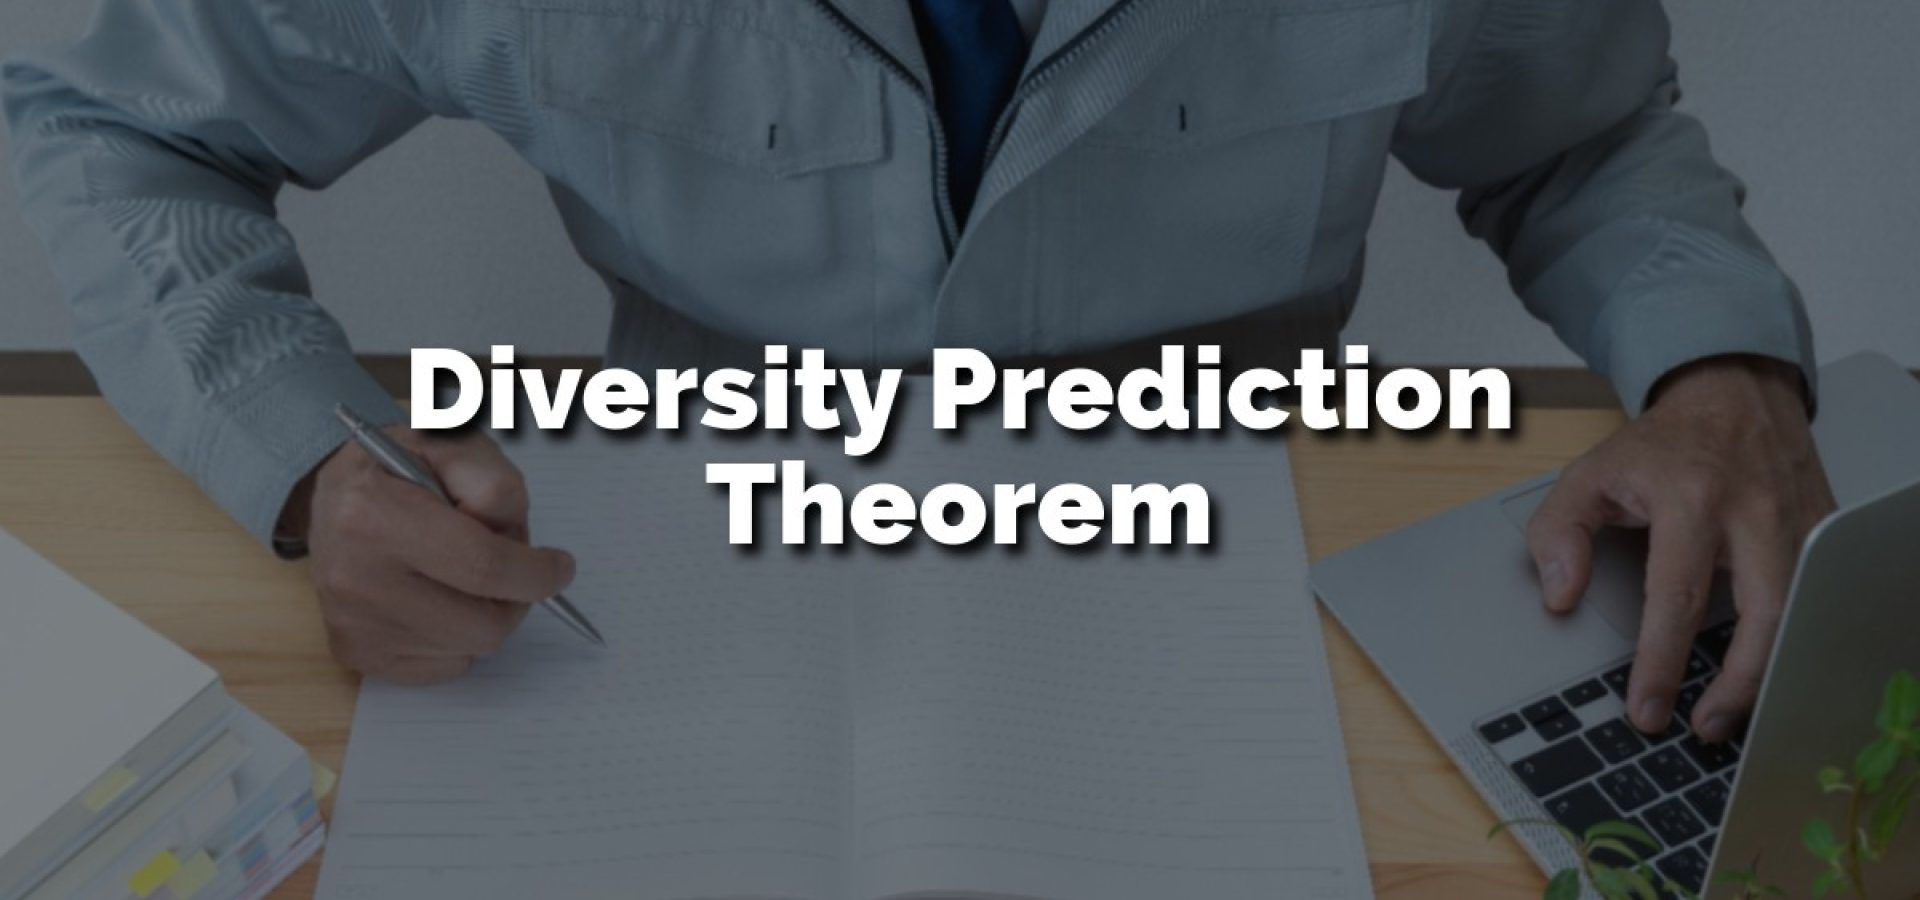 Diversity prediction theorem explained by a professional